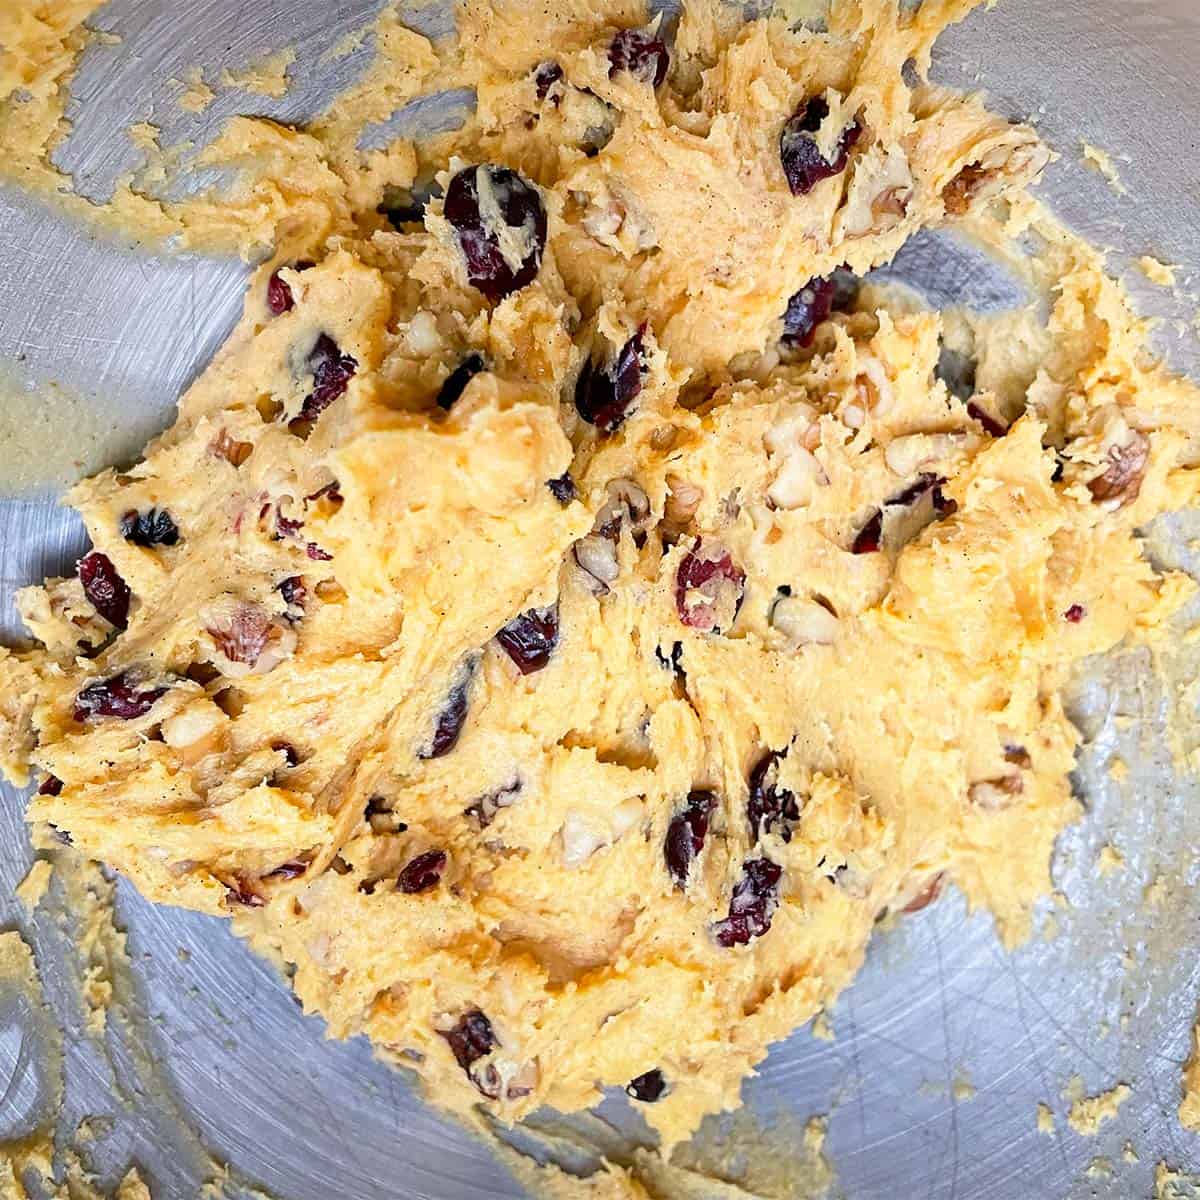 All ingredients are mixed together for the pumpkin cranberry cookies.